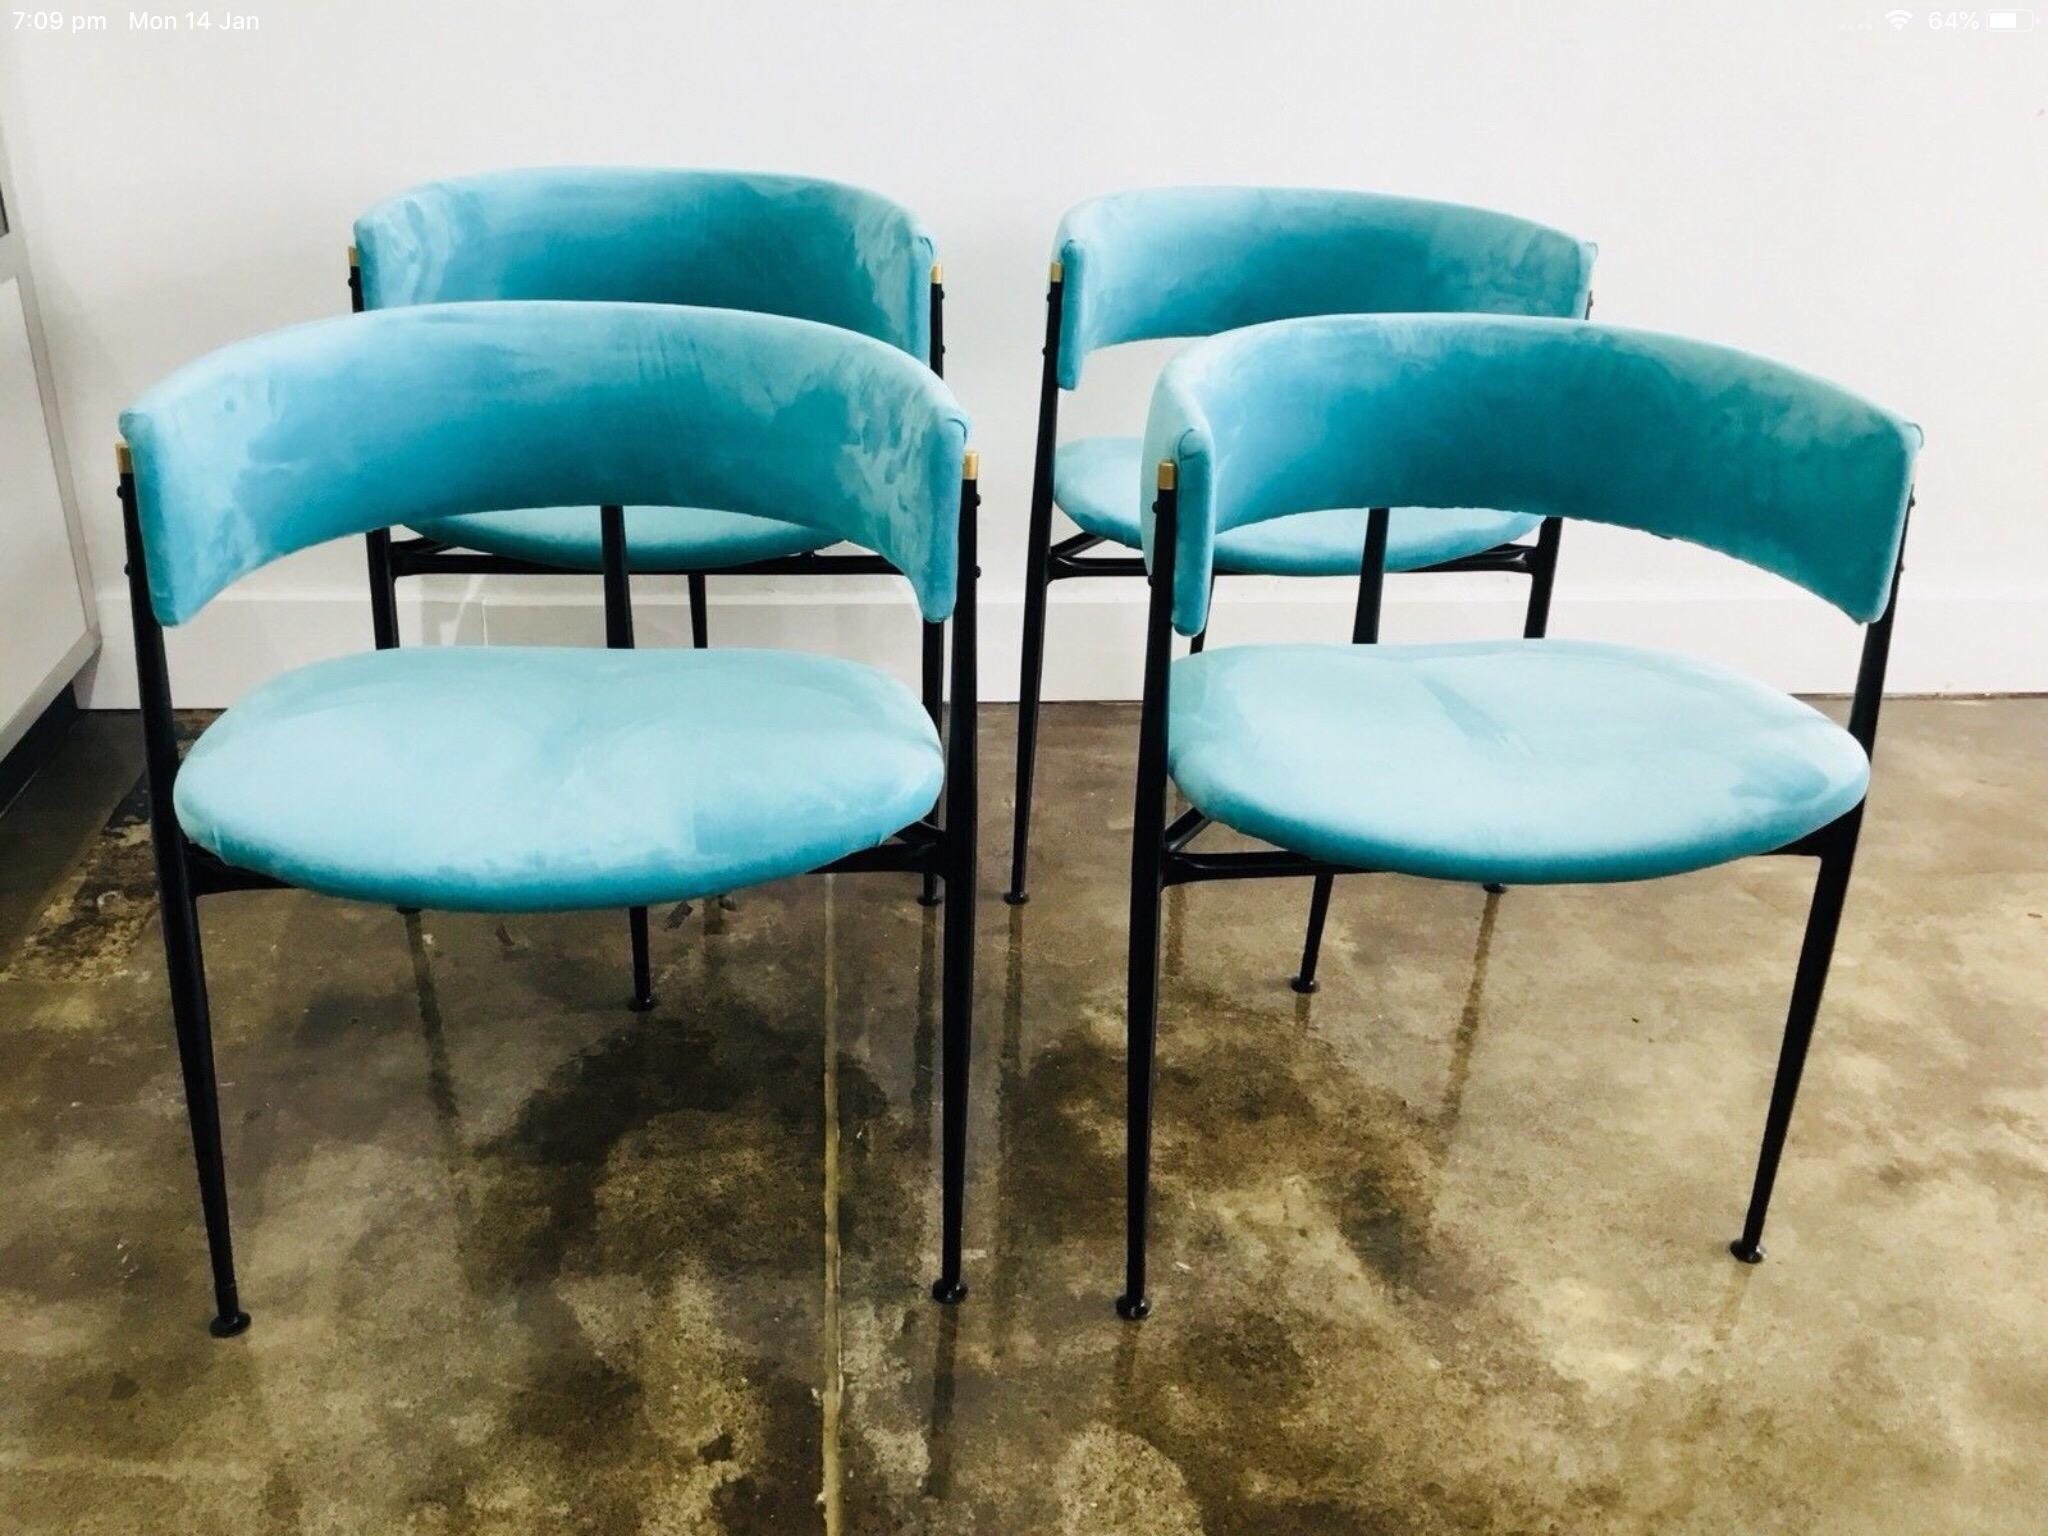 Midcentury Australian 1950s atomic age three-legged dining chairs, fully restored and newly reupholstered in a quality aquamarine velvet.

A great example of innovative Australian post war design, extremely comfortable, curved low back chair,